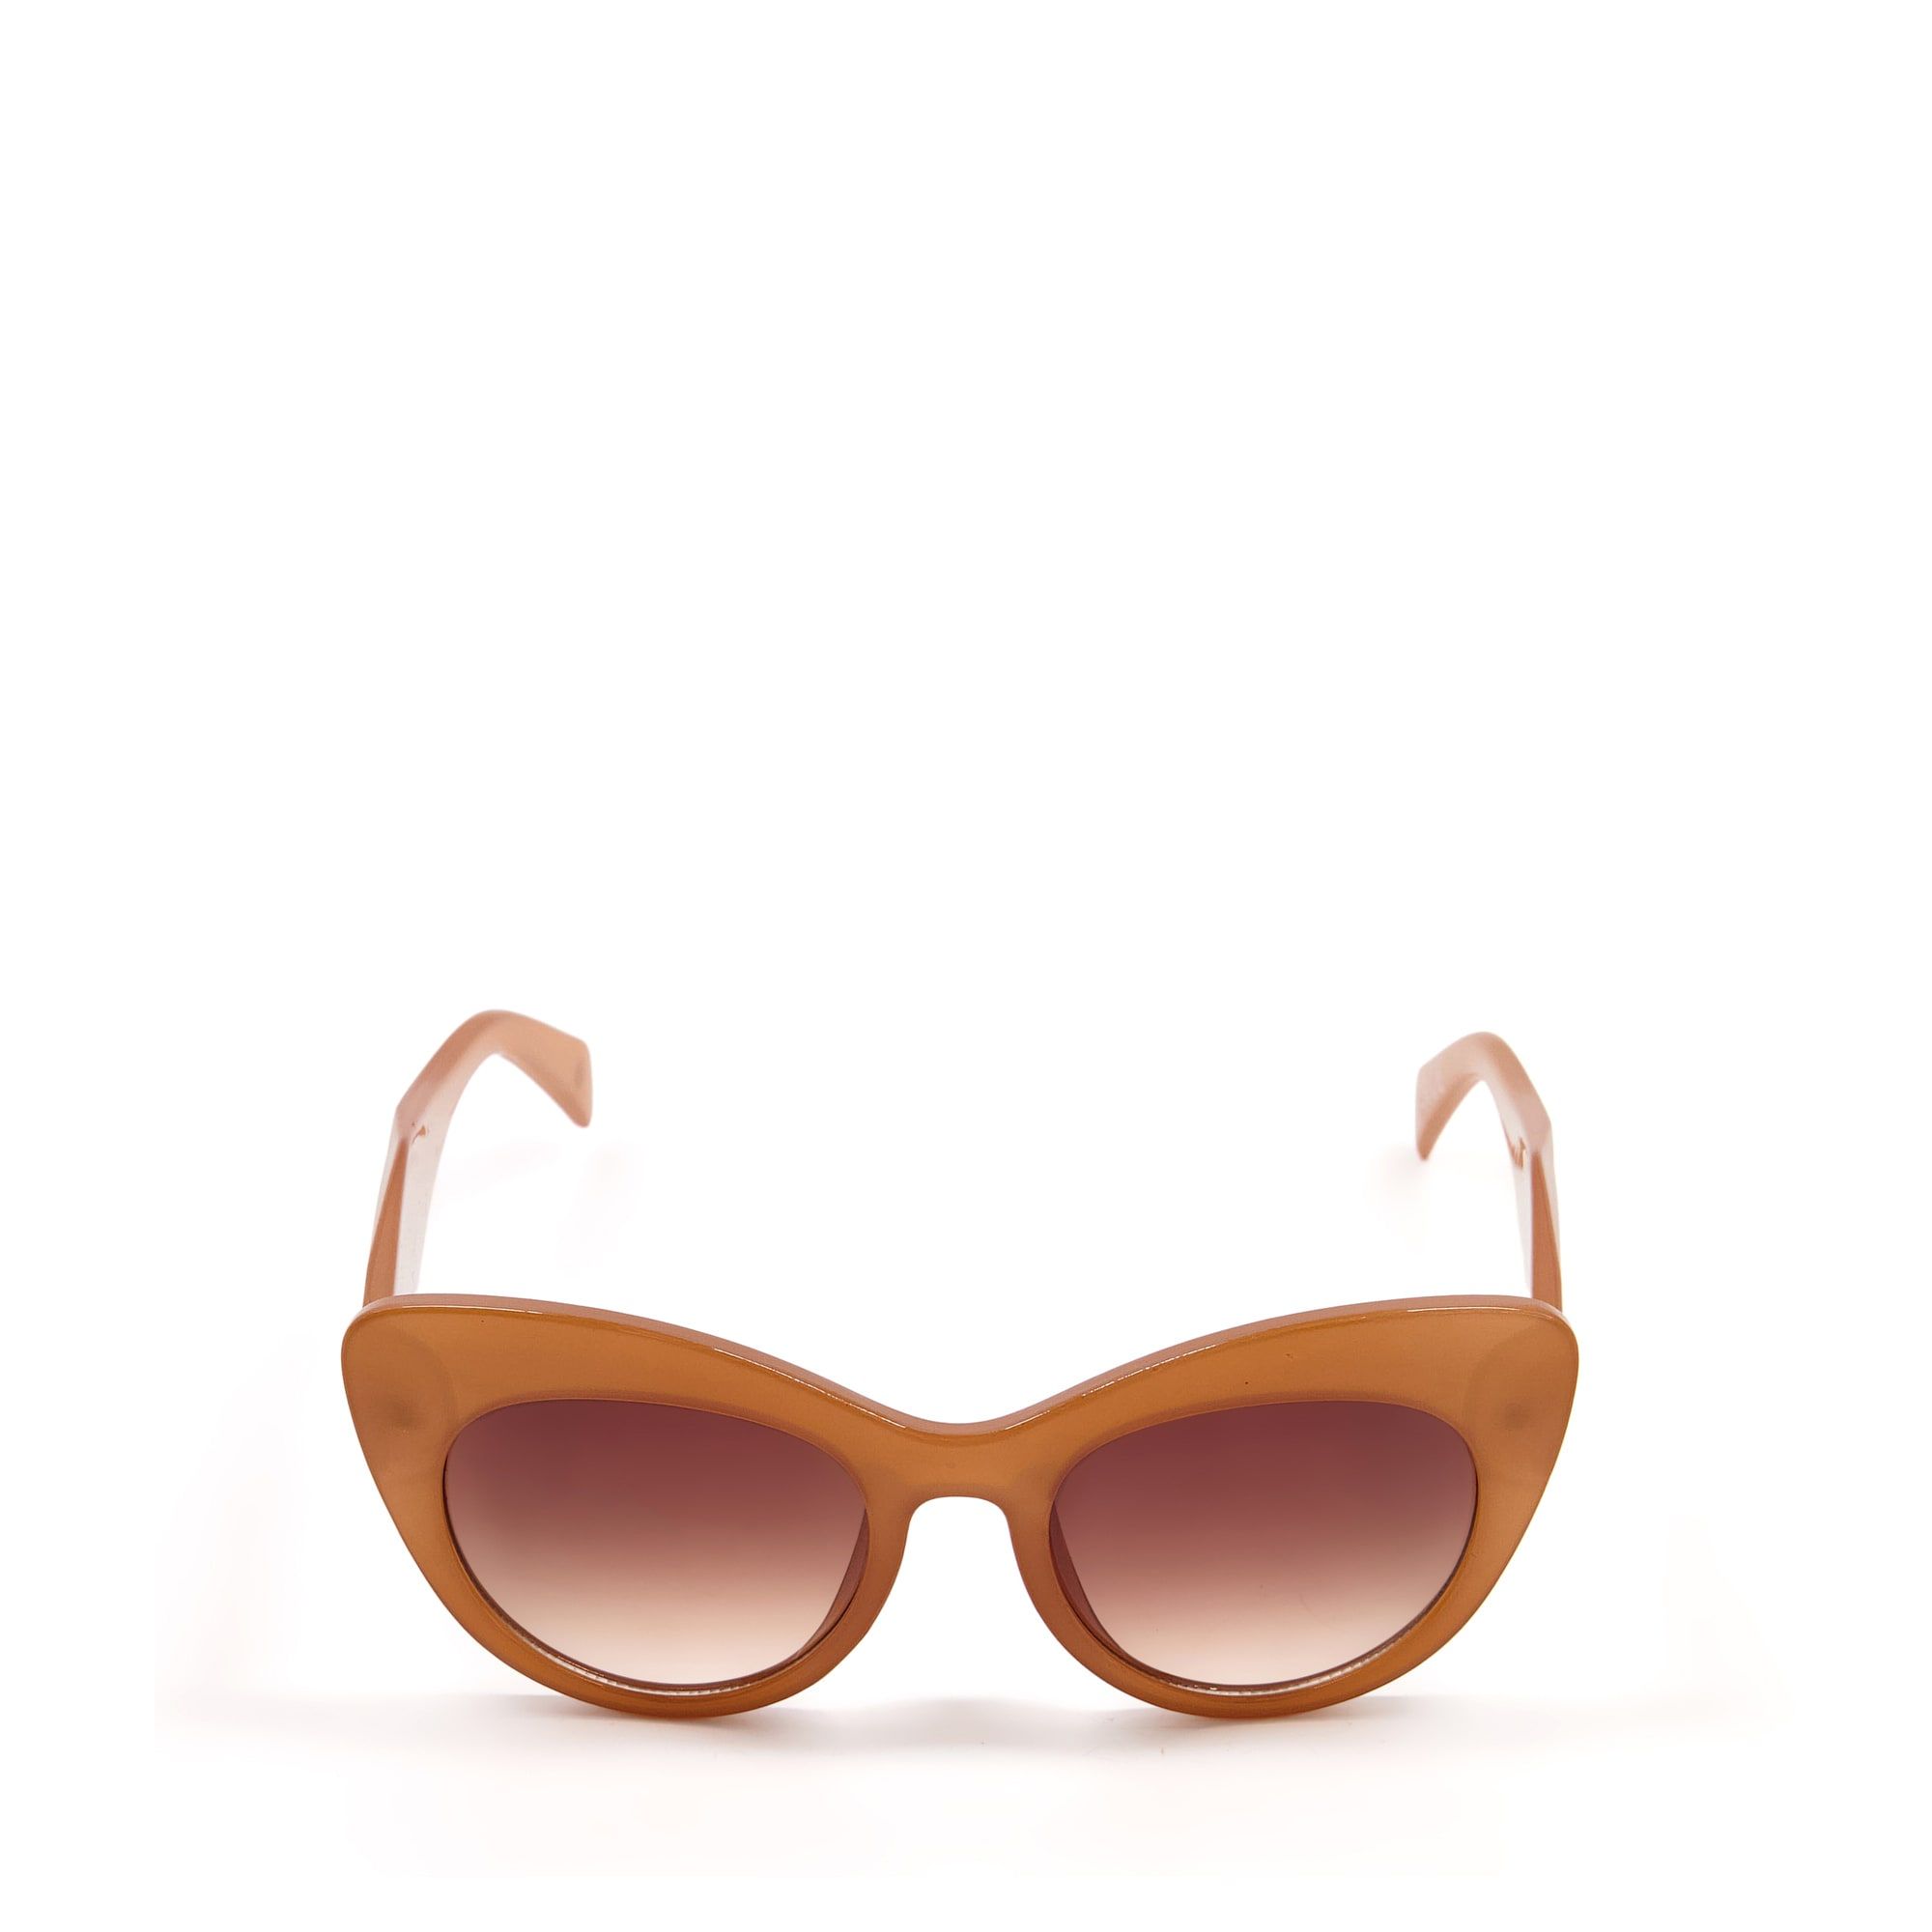 A glamorous style for the summer season, our Galloway glasses boast an oversized frame, gold-tone details and tonal lenses. We've also included a protective case to help keep them safe on your travels. Category 3 UV protection.